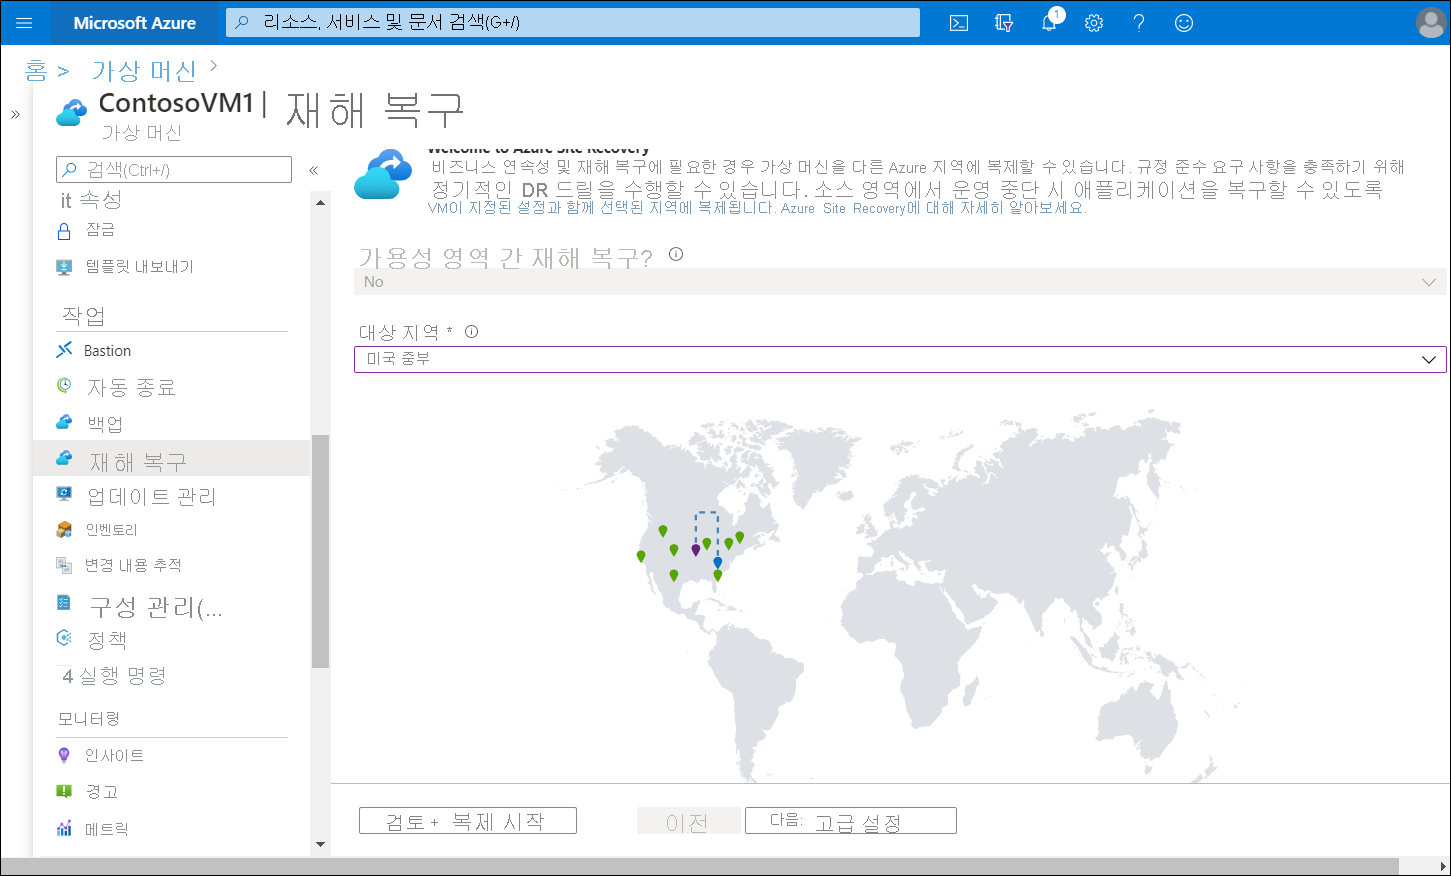 A screenshot of the Disaster recovery blade for the ContosoVM1 virtual machine. Central US has been selected as the Target region. A map displays with this region highlighted.